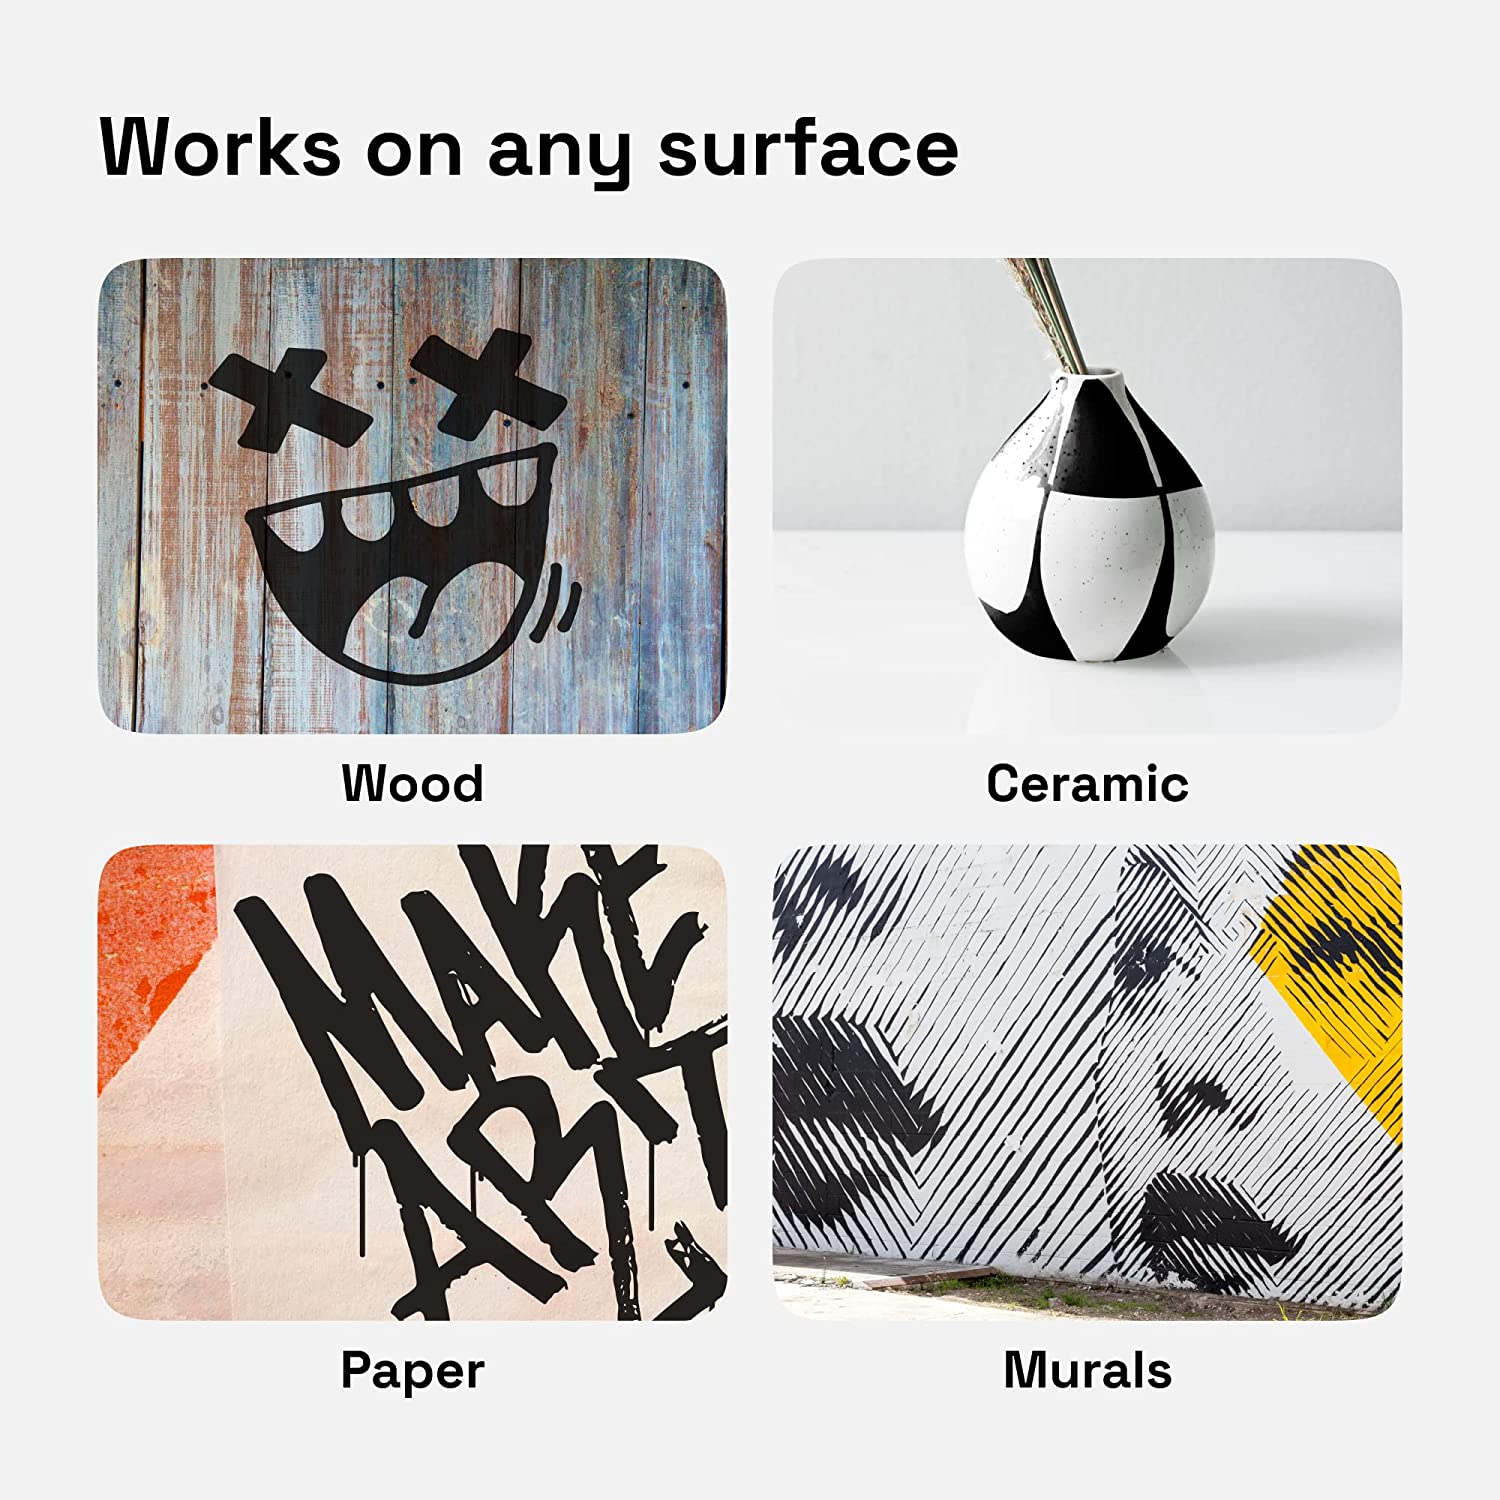 works on any surface: wood, ceramic, paper, murals